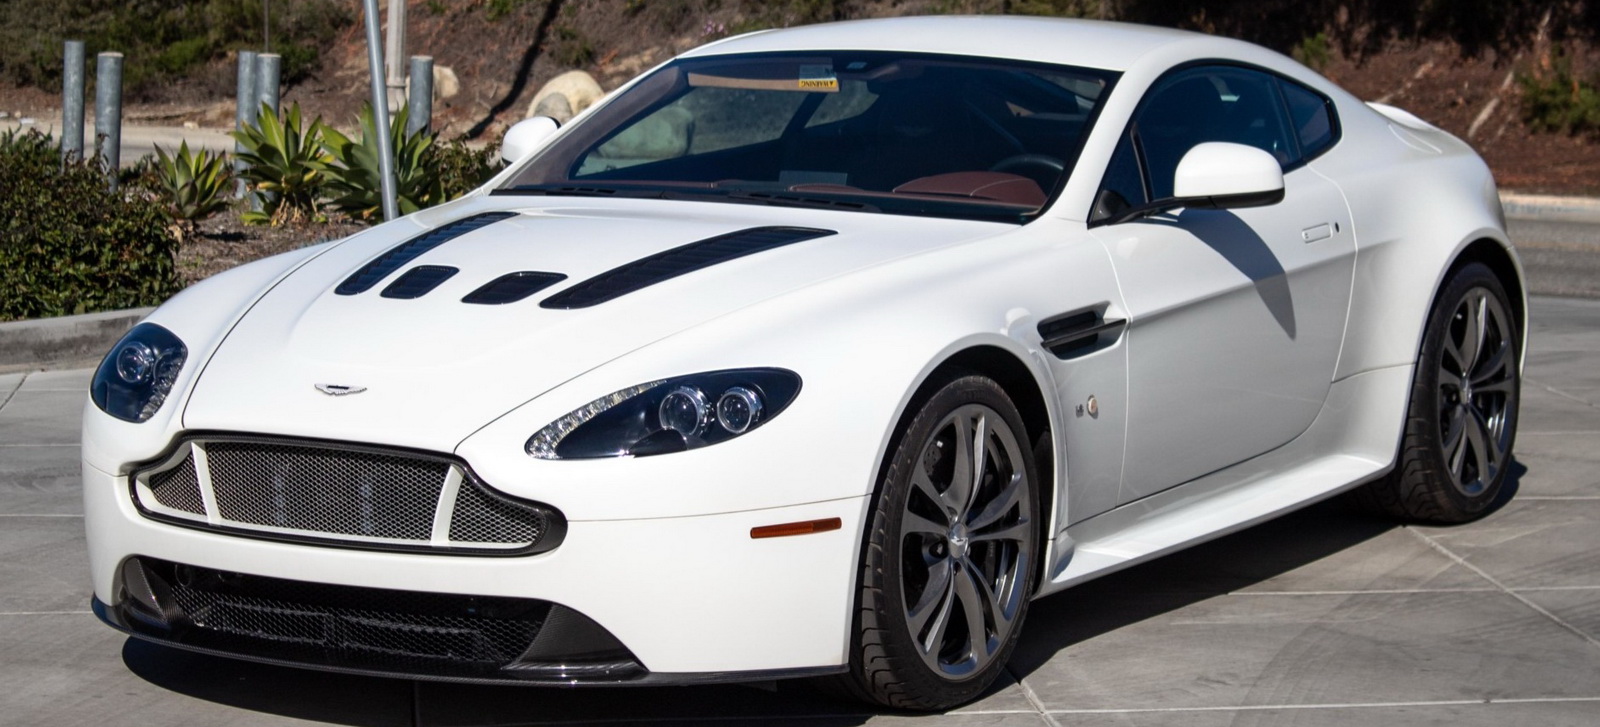 Want A Near-New 2016 Aston Martin V12 Vantage S? This One Has Only 167  Miles | Carscoops